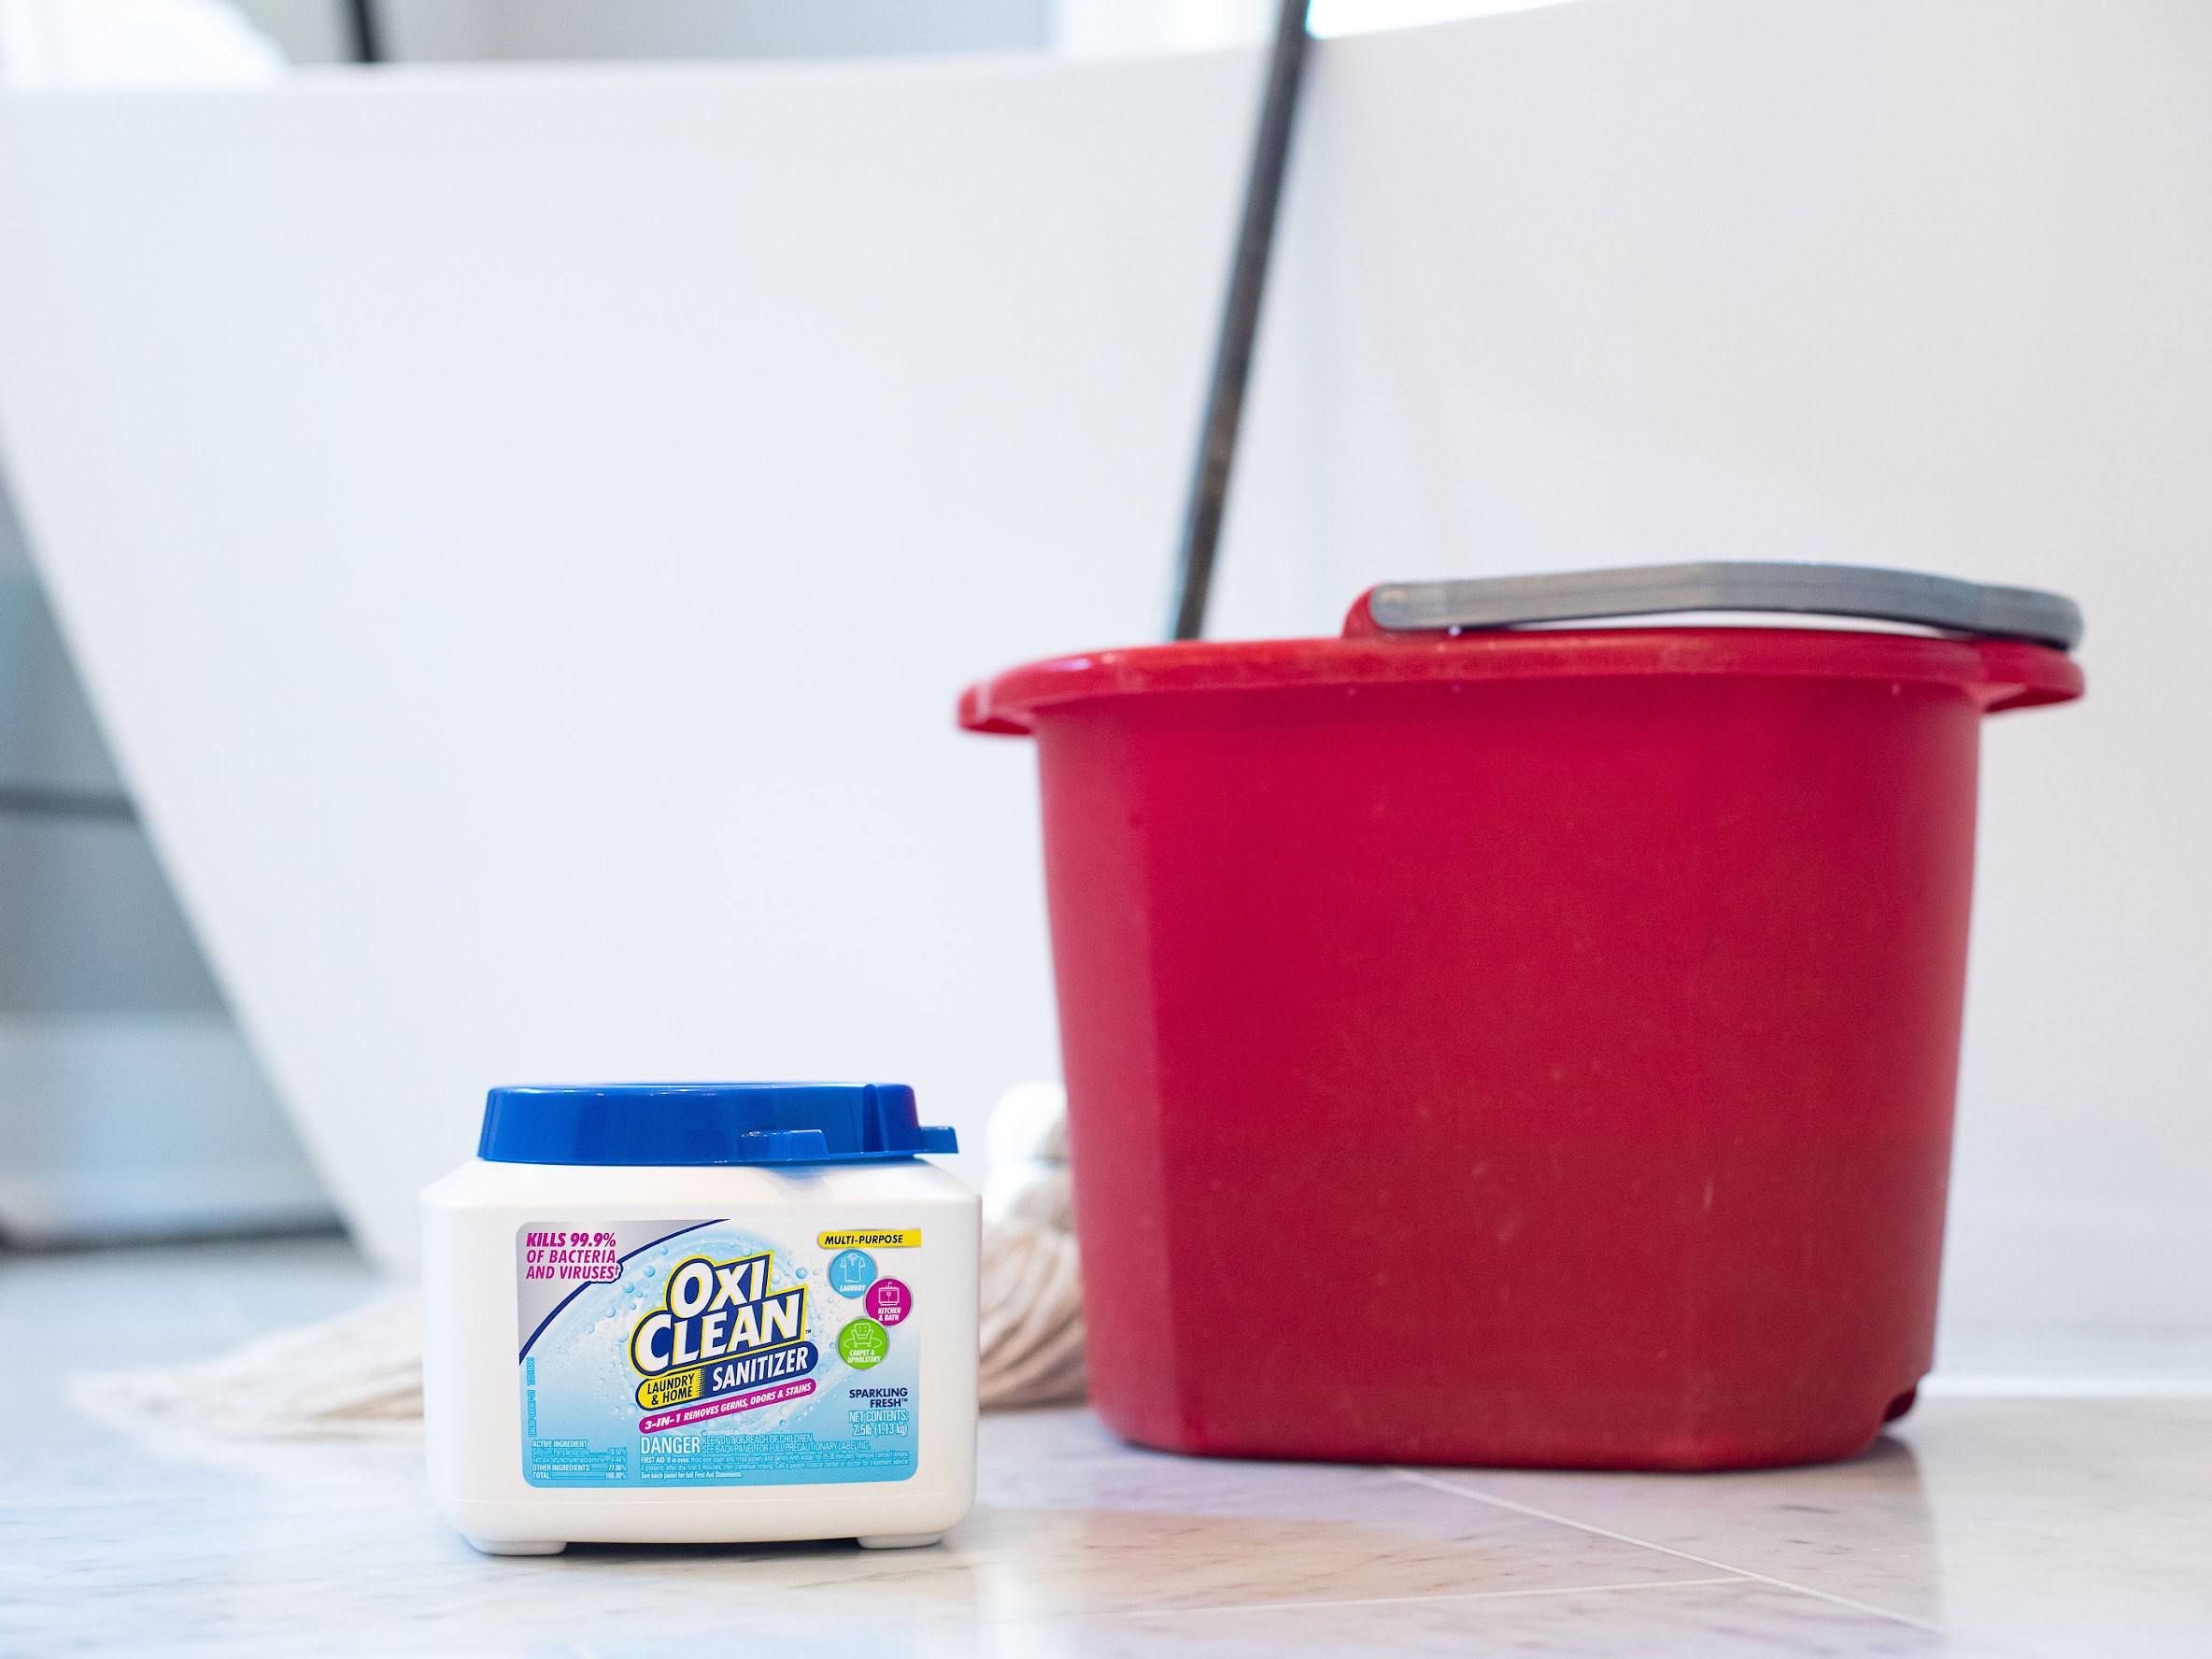 When Life Gets Messy, Clean It Up With New OxiClean™ Laundry & Home Sanitizer on I Heart Publix